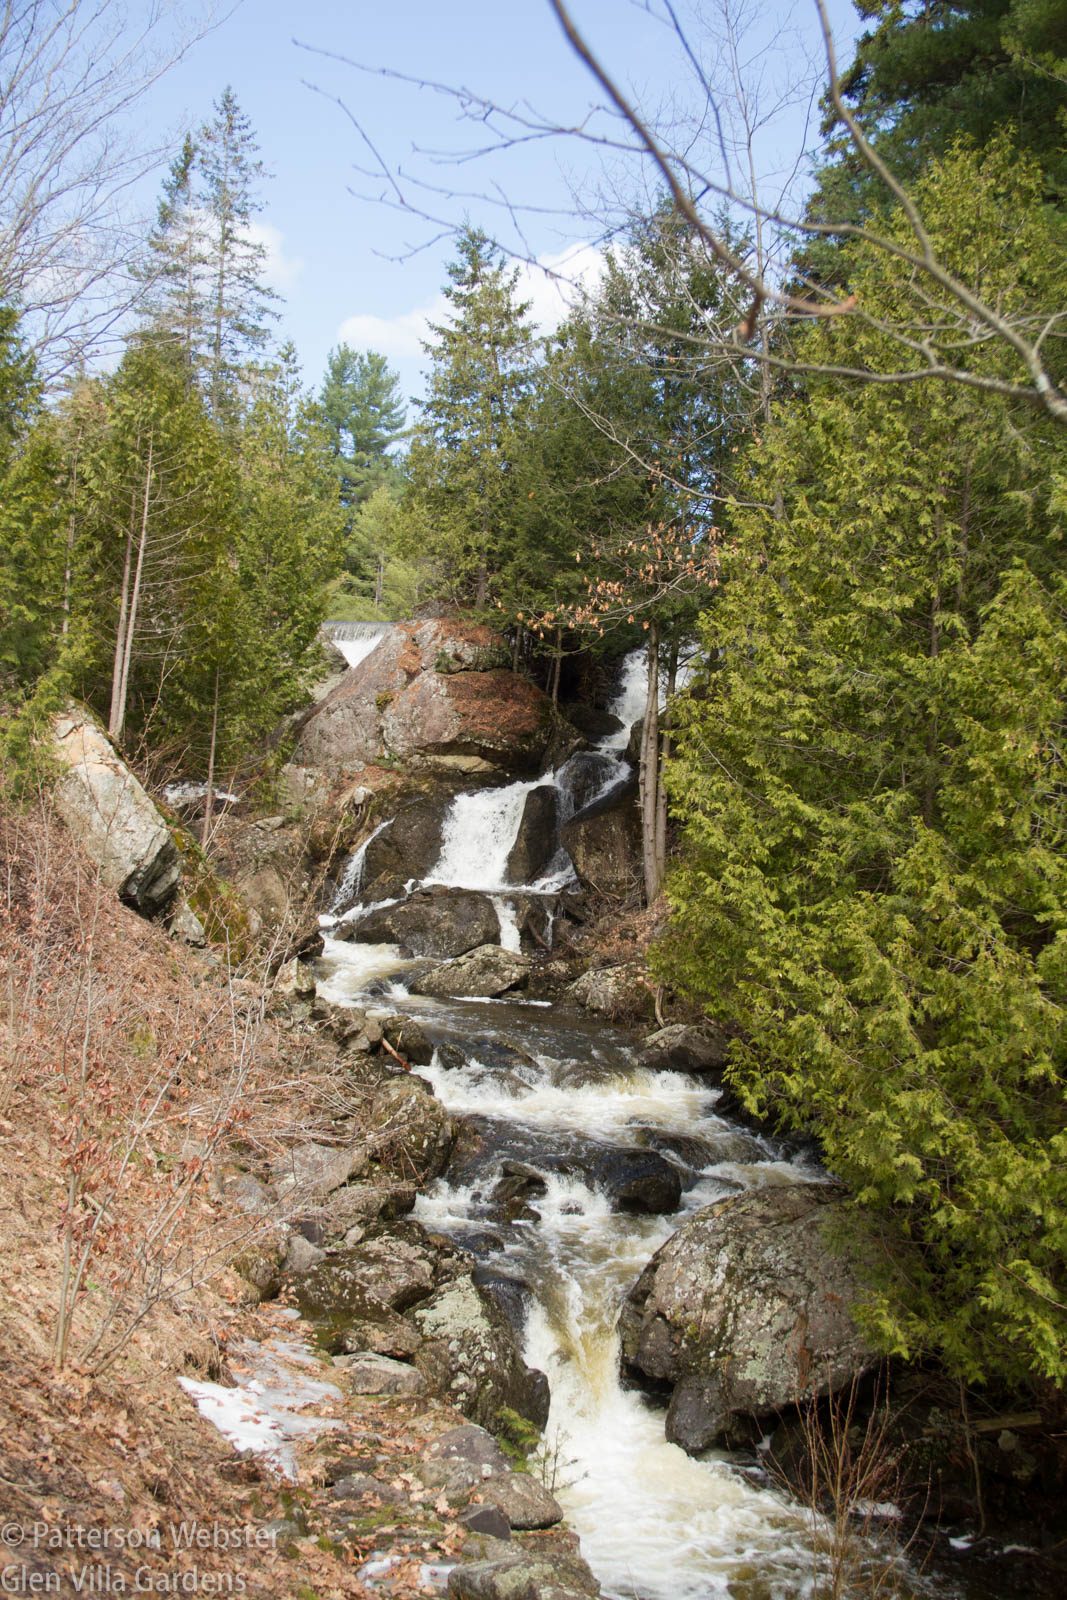 The waterfall is a prominent feature of the landscape at Glen Villa.